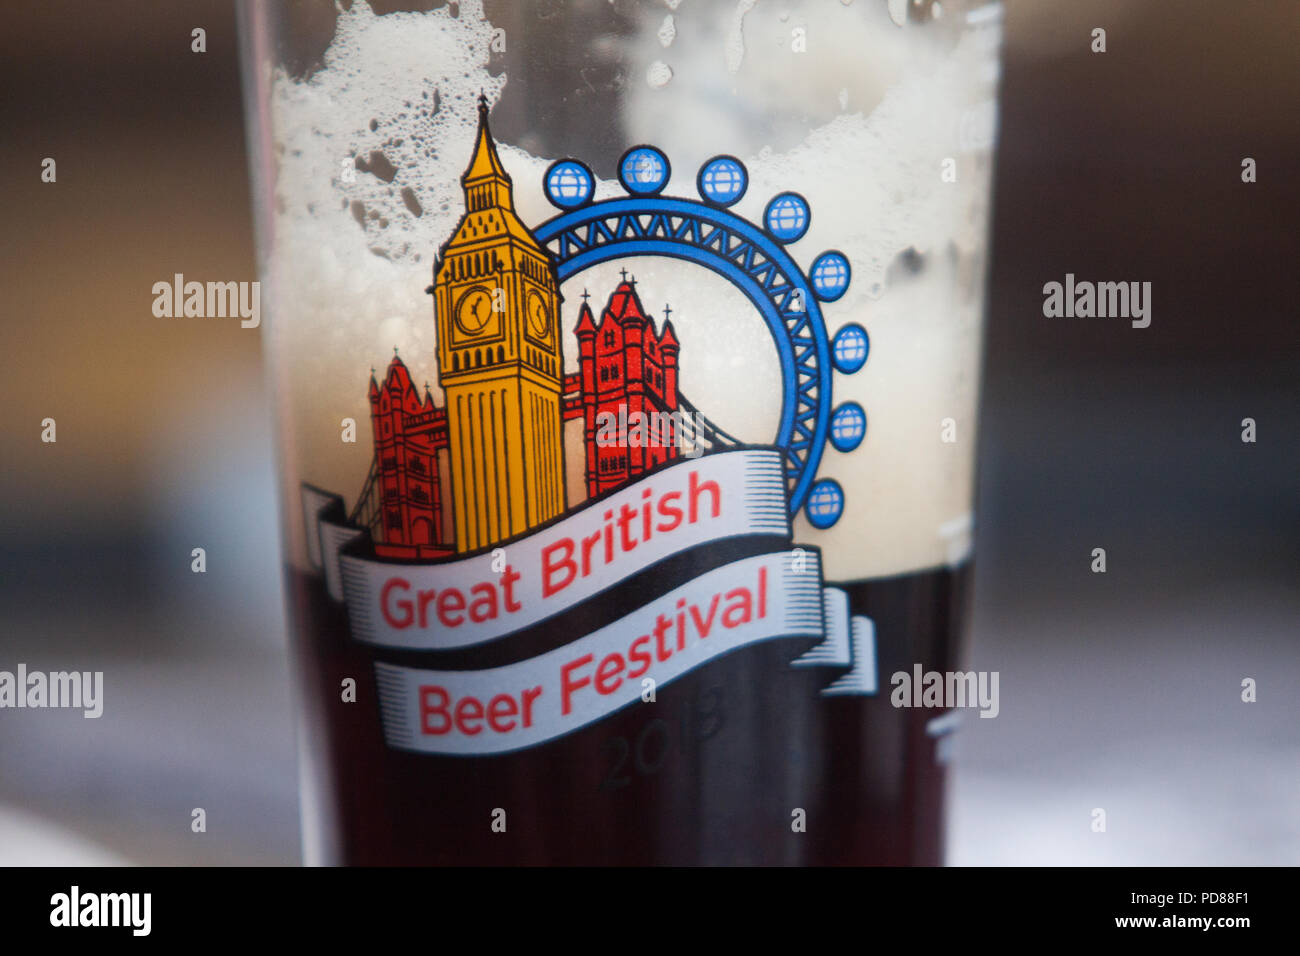 London UK. 7th August 2018. Visitors at the CAMRA (Campaign for Real Ale) Great British Beer Festival Britain's largest beer festival at Olympia exhibition centre. The five day event with around 55,000 people expected to attend and  features over 900 real ales and ciders from around the world. Credit: amer ghazzal/Alamy Live News Stock Photo